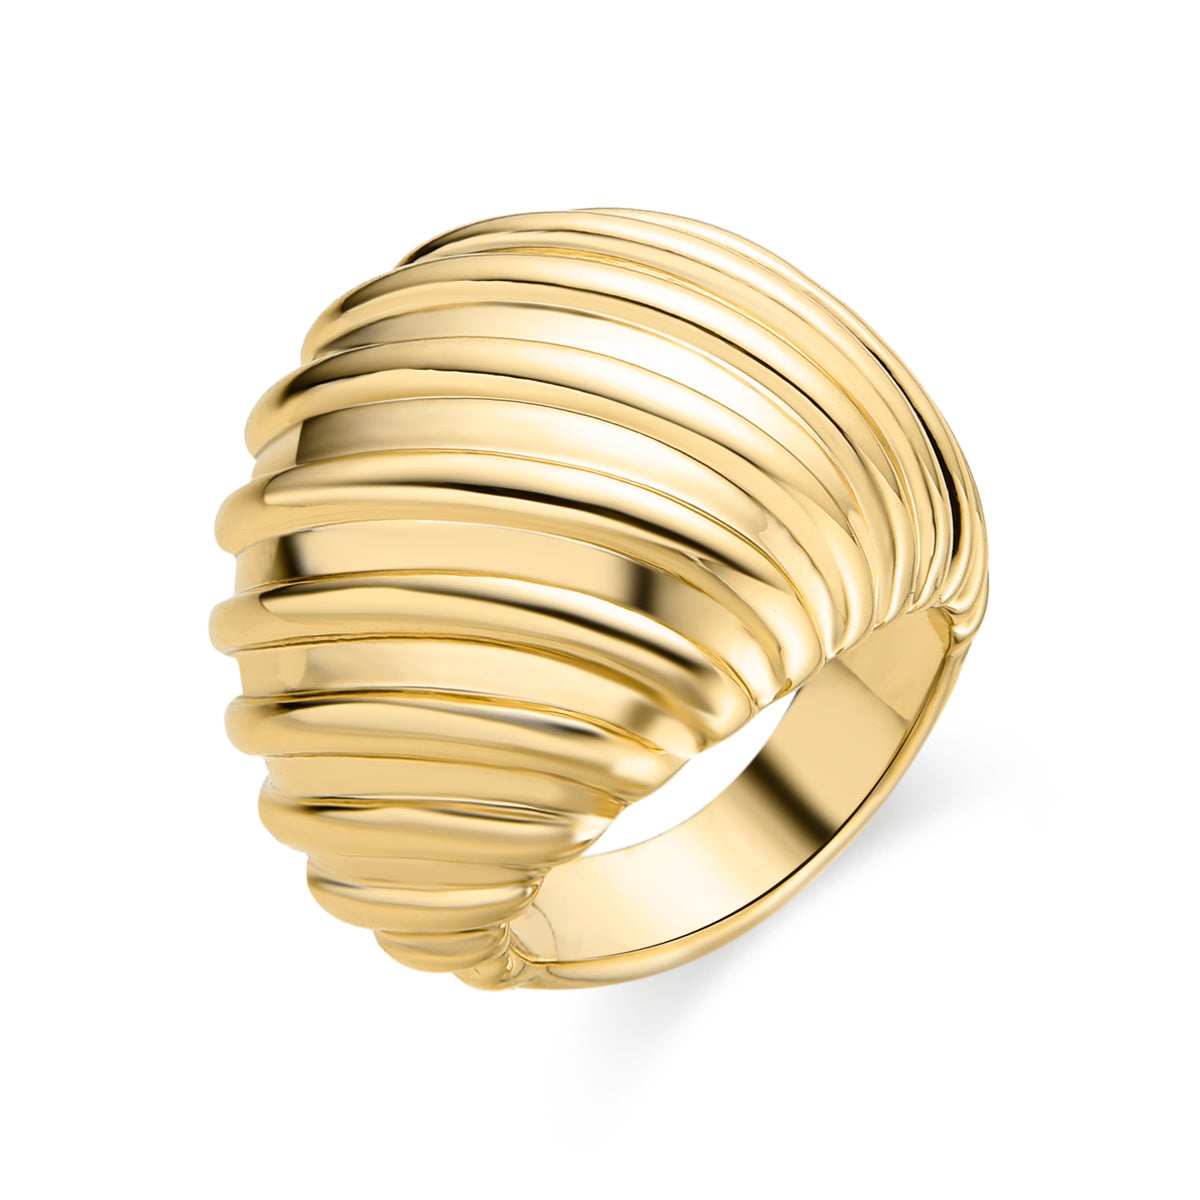 Kaizal ring finished in 18k gold